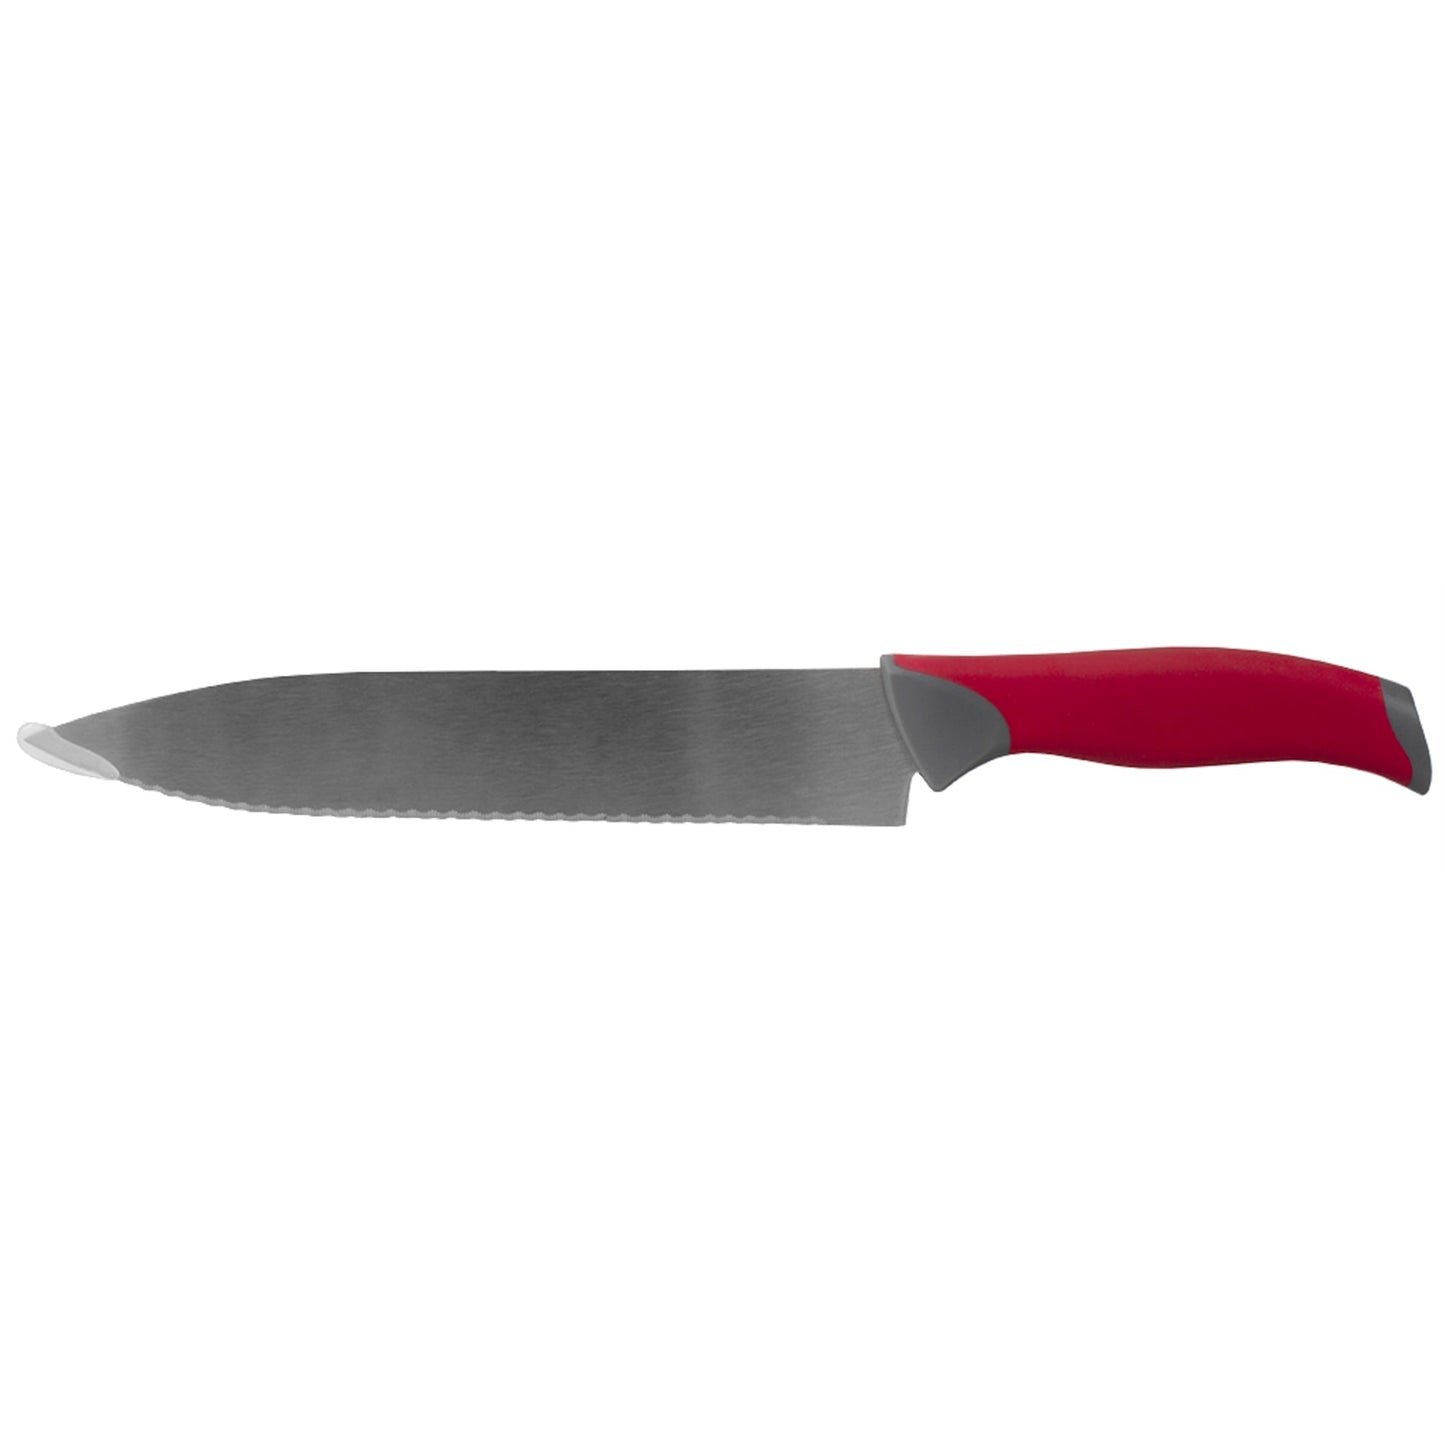 Stainless Steel Knife Set with Non-Slip Handles and Protective Bolster, Red